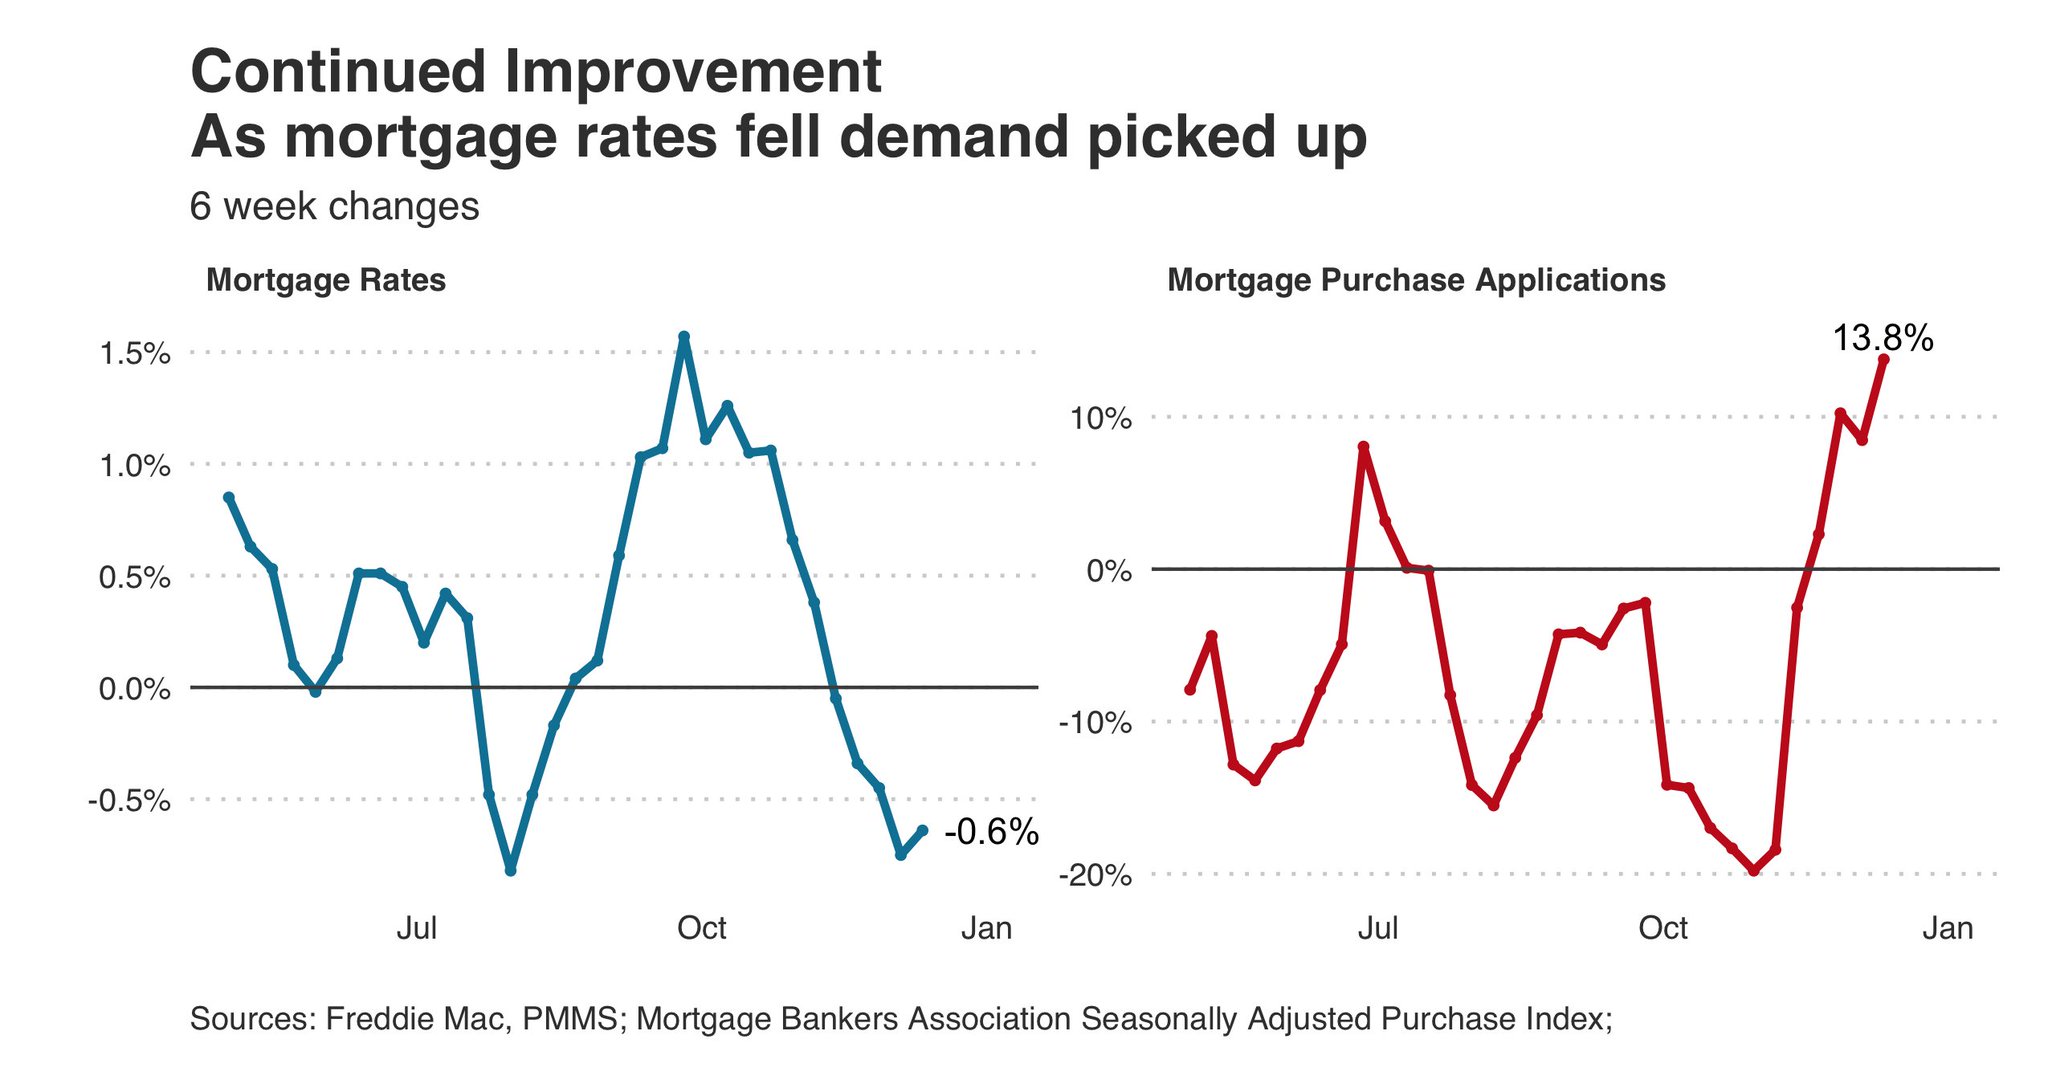 increase real estate demand as mortgage rates decline